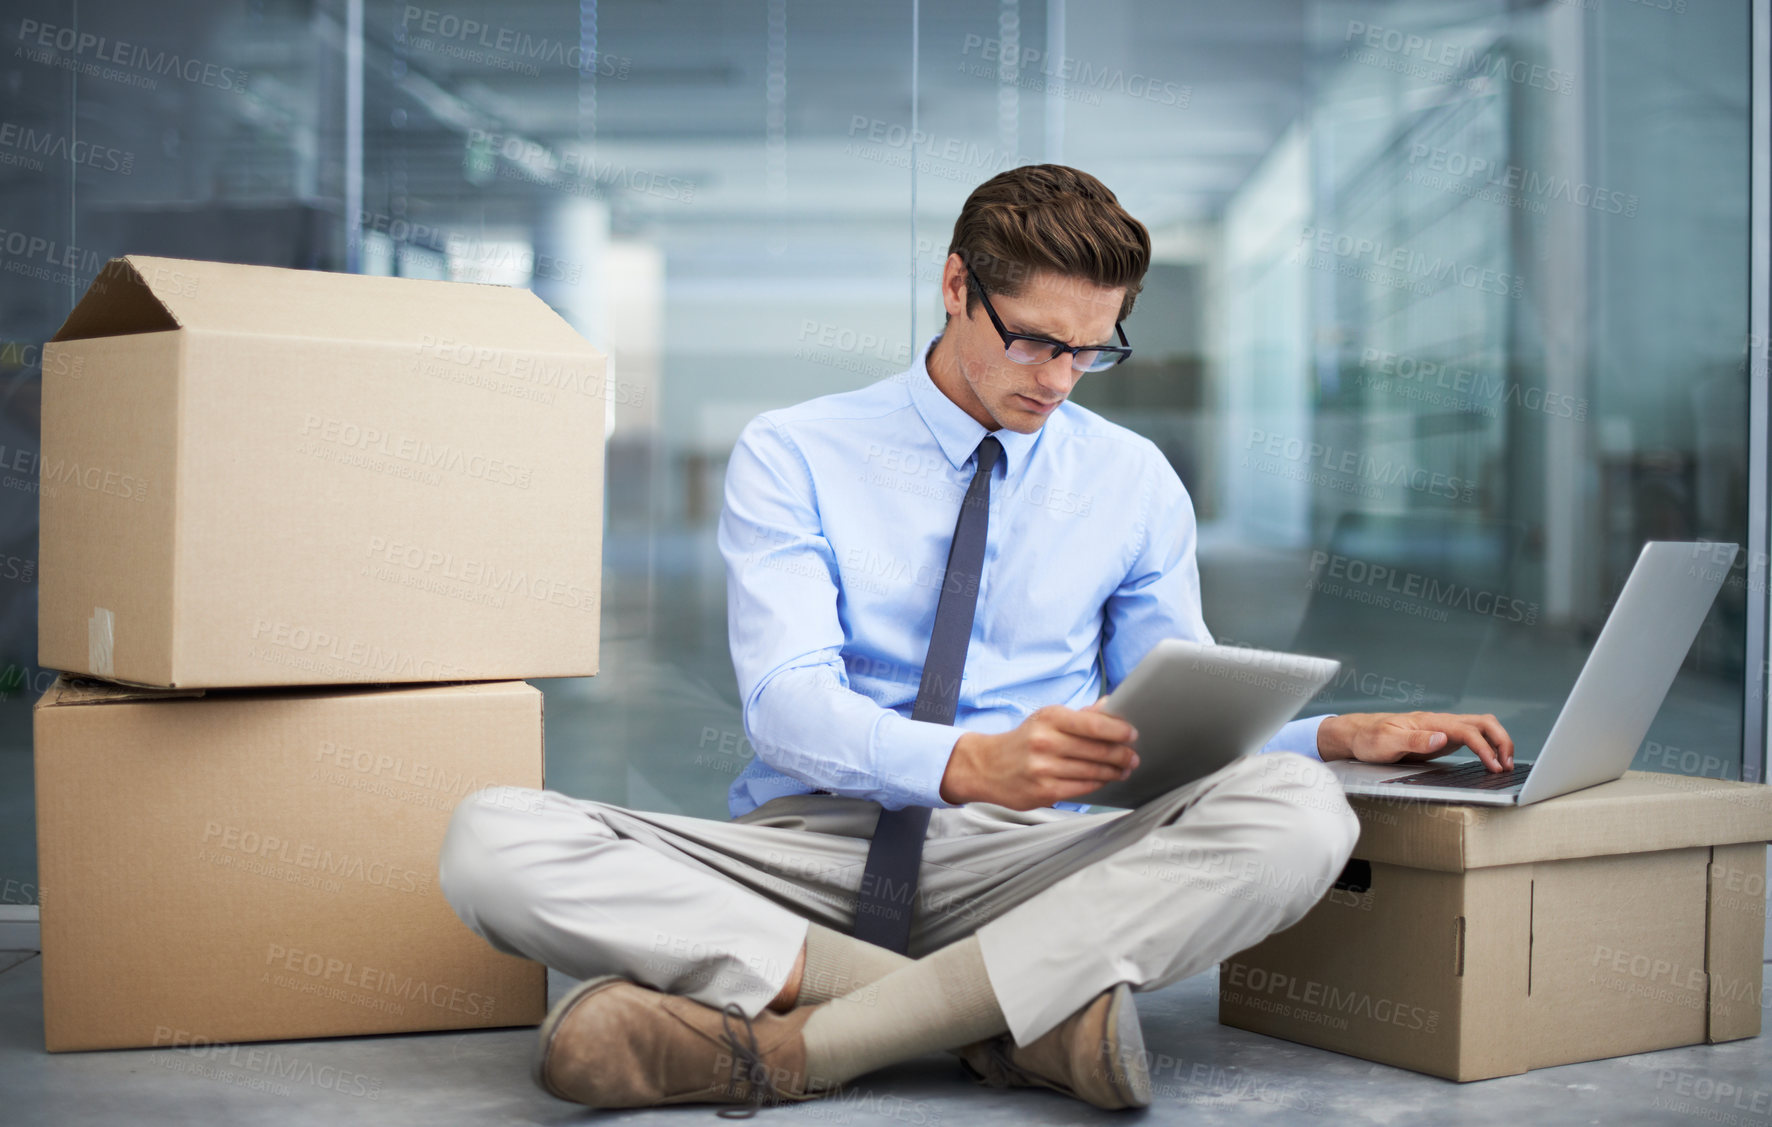 Buy stock photo Tablet, office laptop and man with moving boxes, business data and reading report, statistics analysis or online news. Workplace relocation, cardboard box and male businessman typing research project